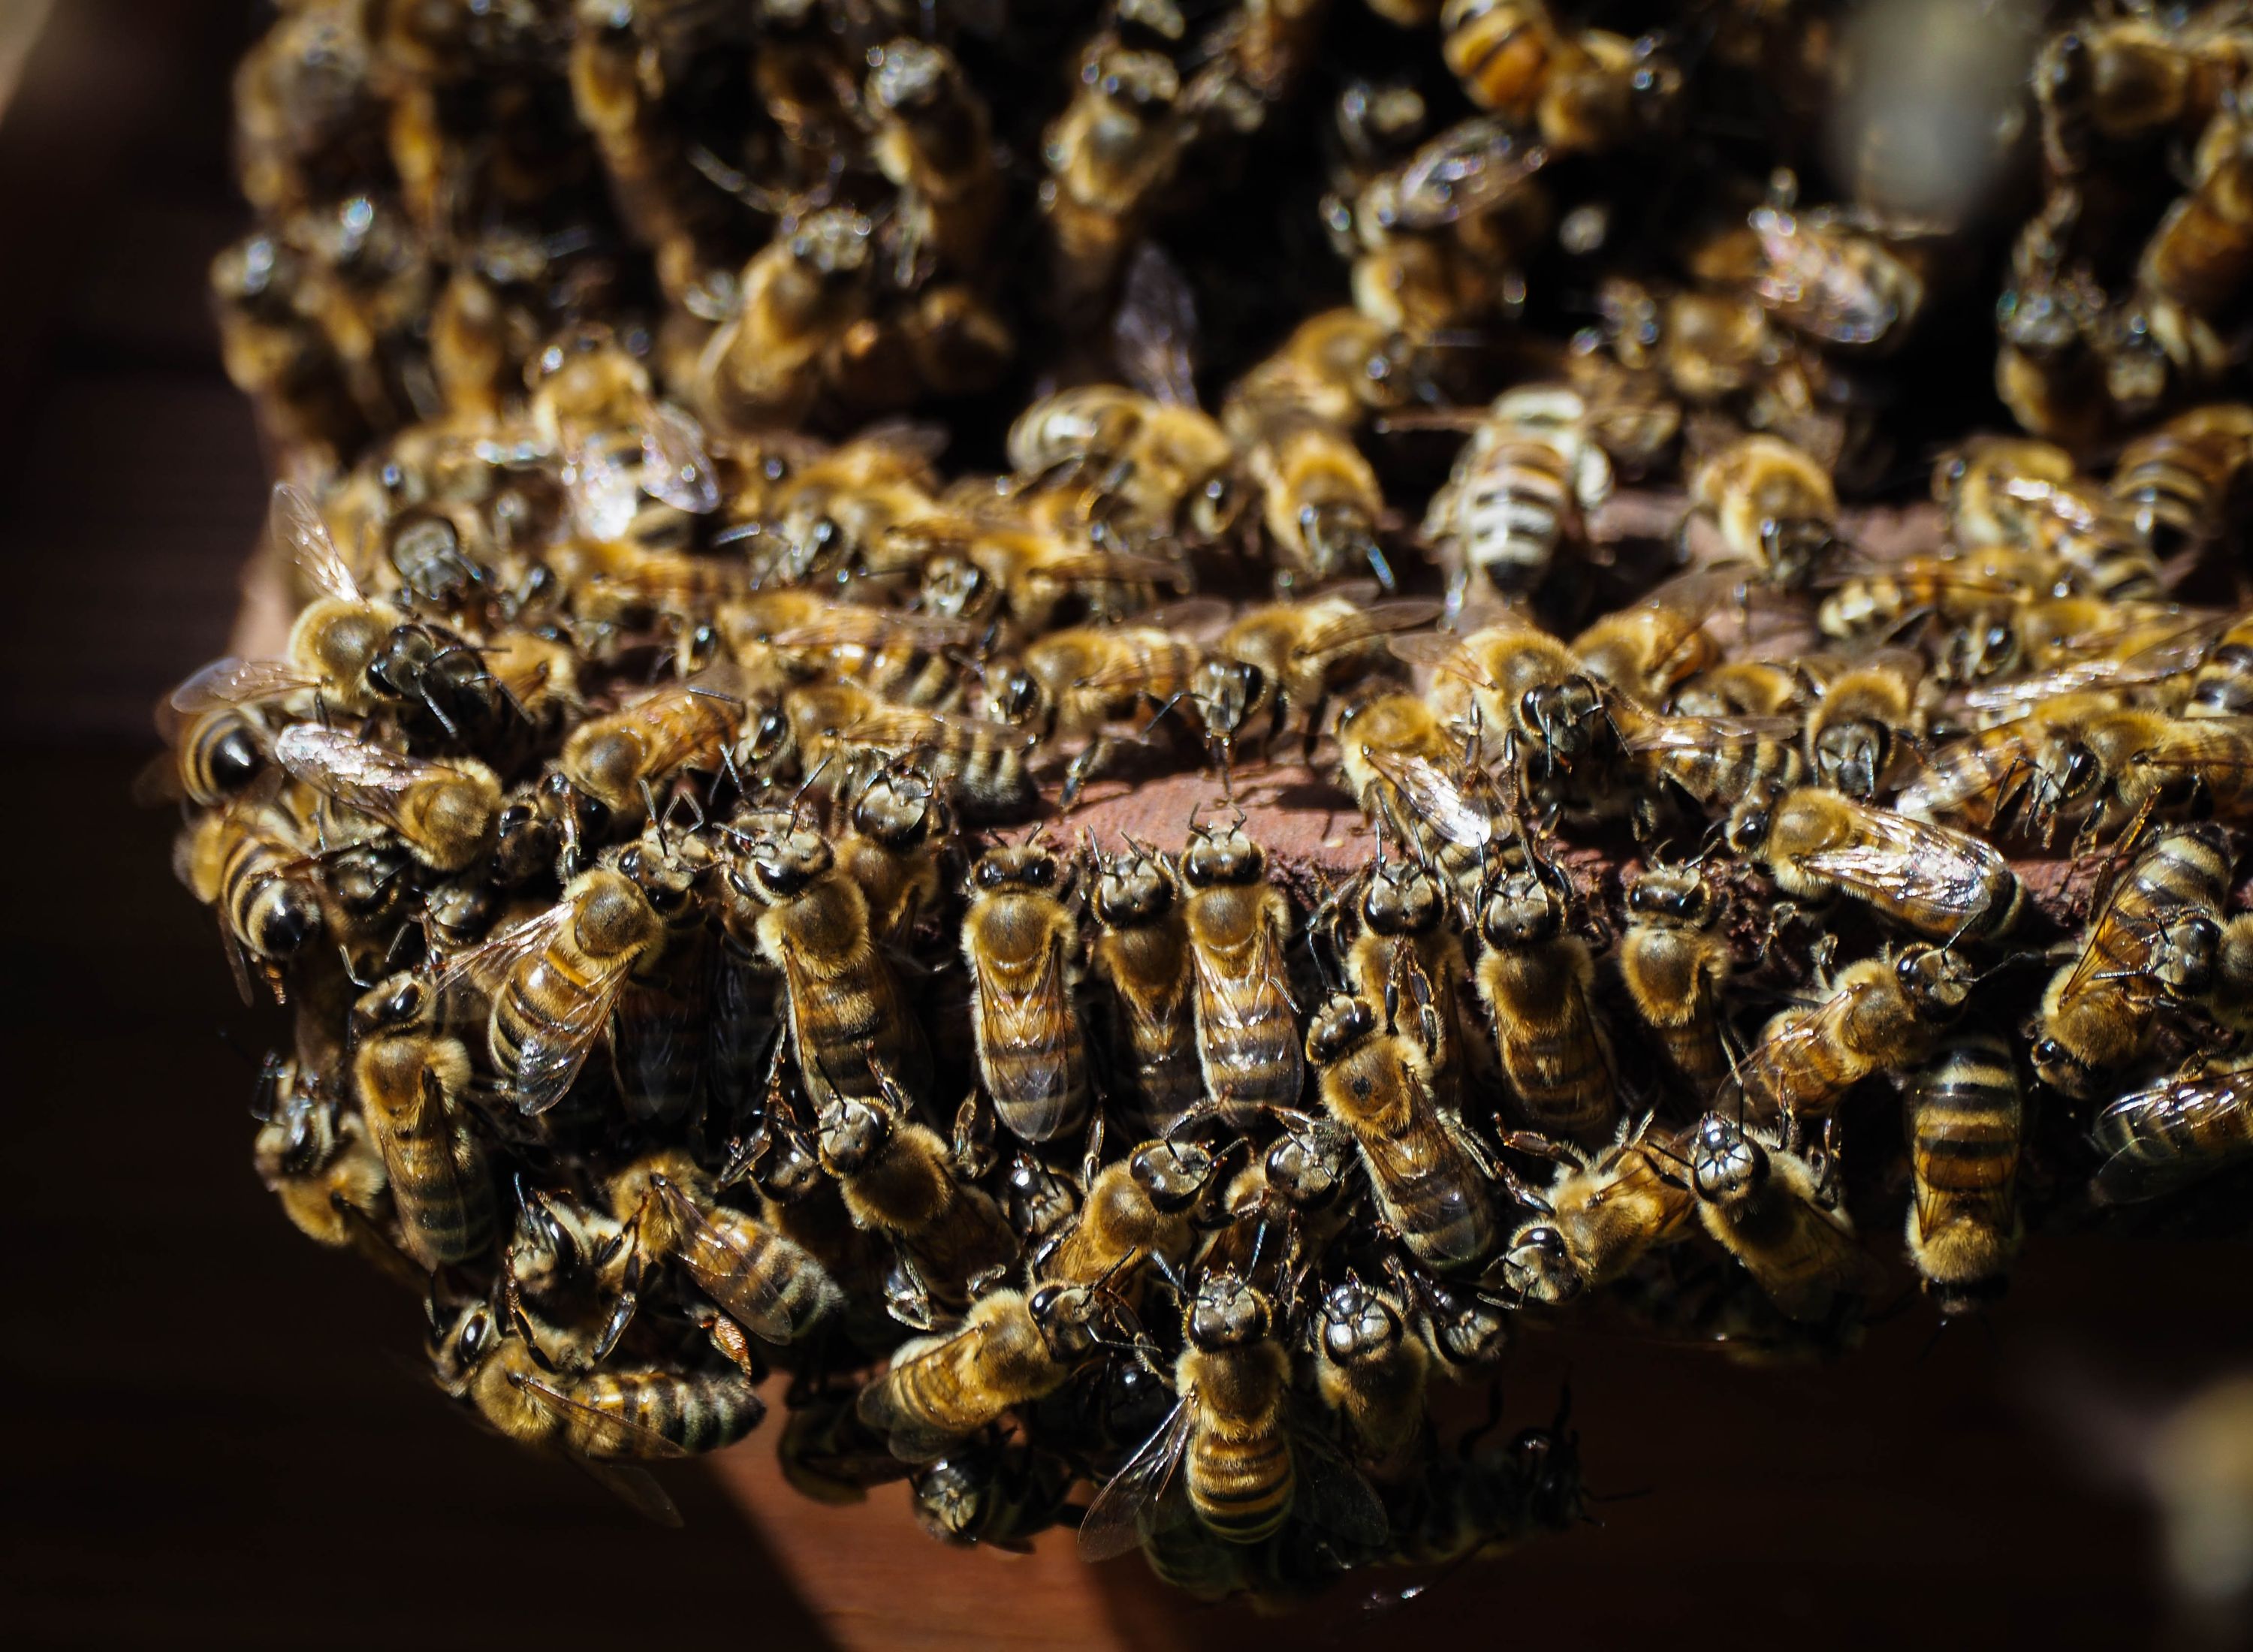 clump of bees forming at the entrance of a beehive, communicating, venting the hive, or preparing to swarm